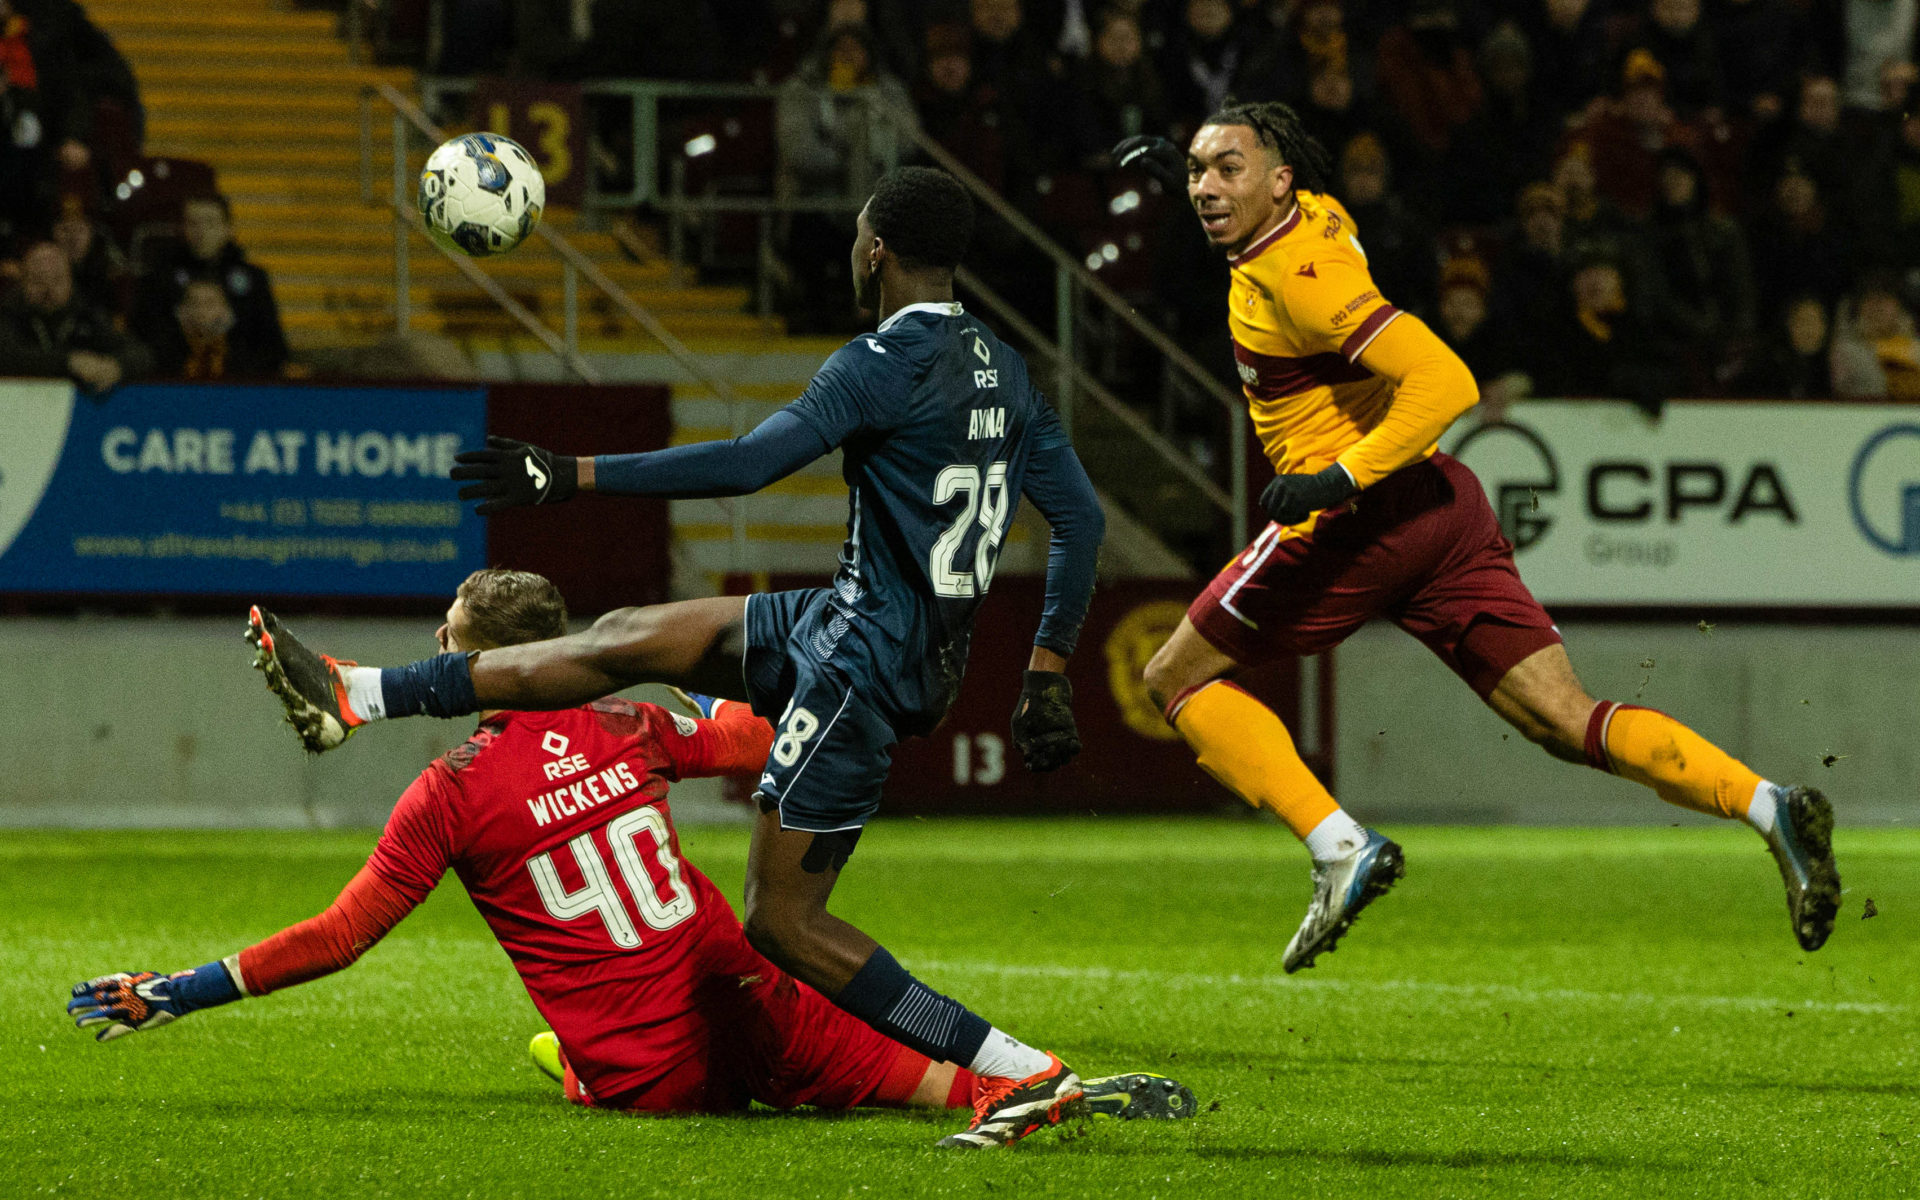 Motherwell put five past Ross County in stunning performance at Fir Park